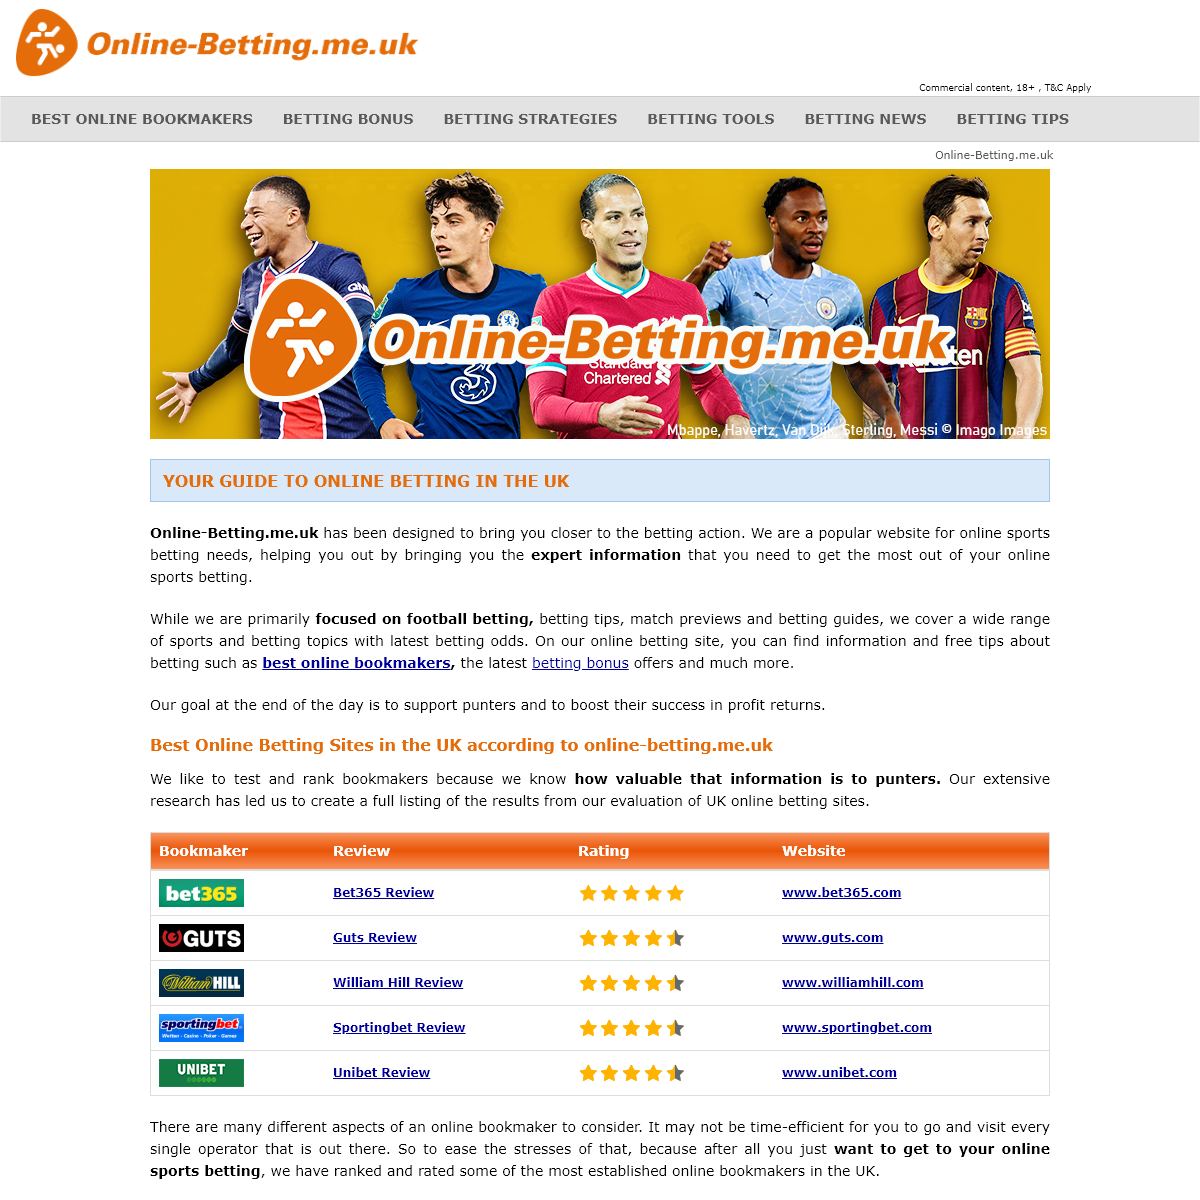 A complete backup of online-betting.me.uk